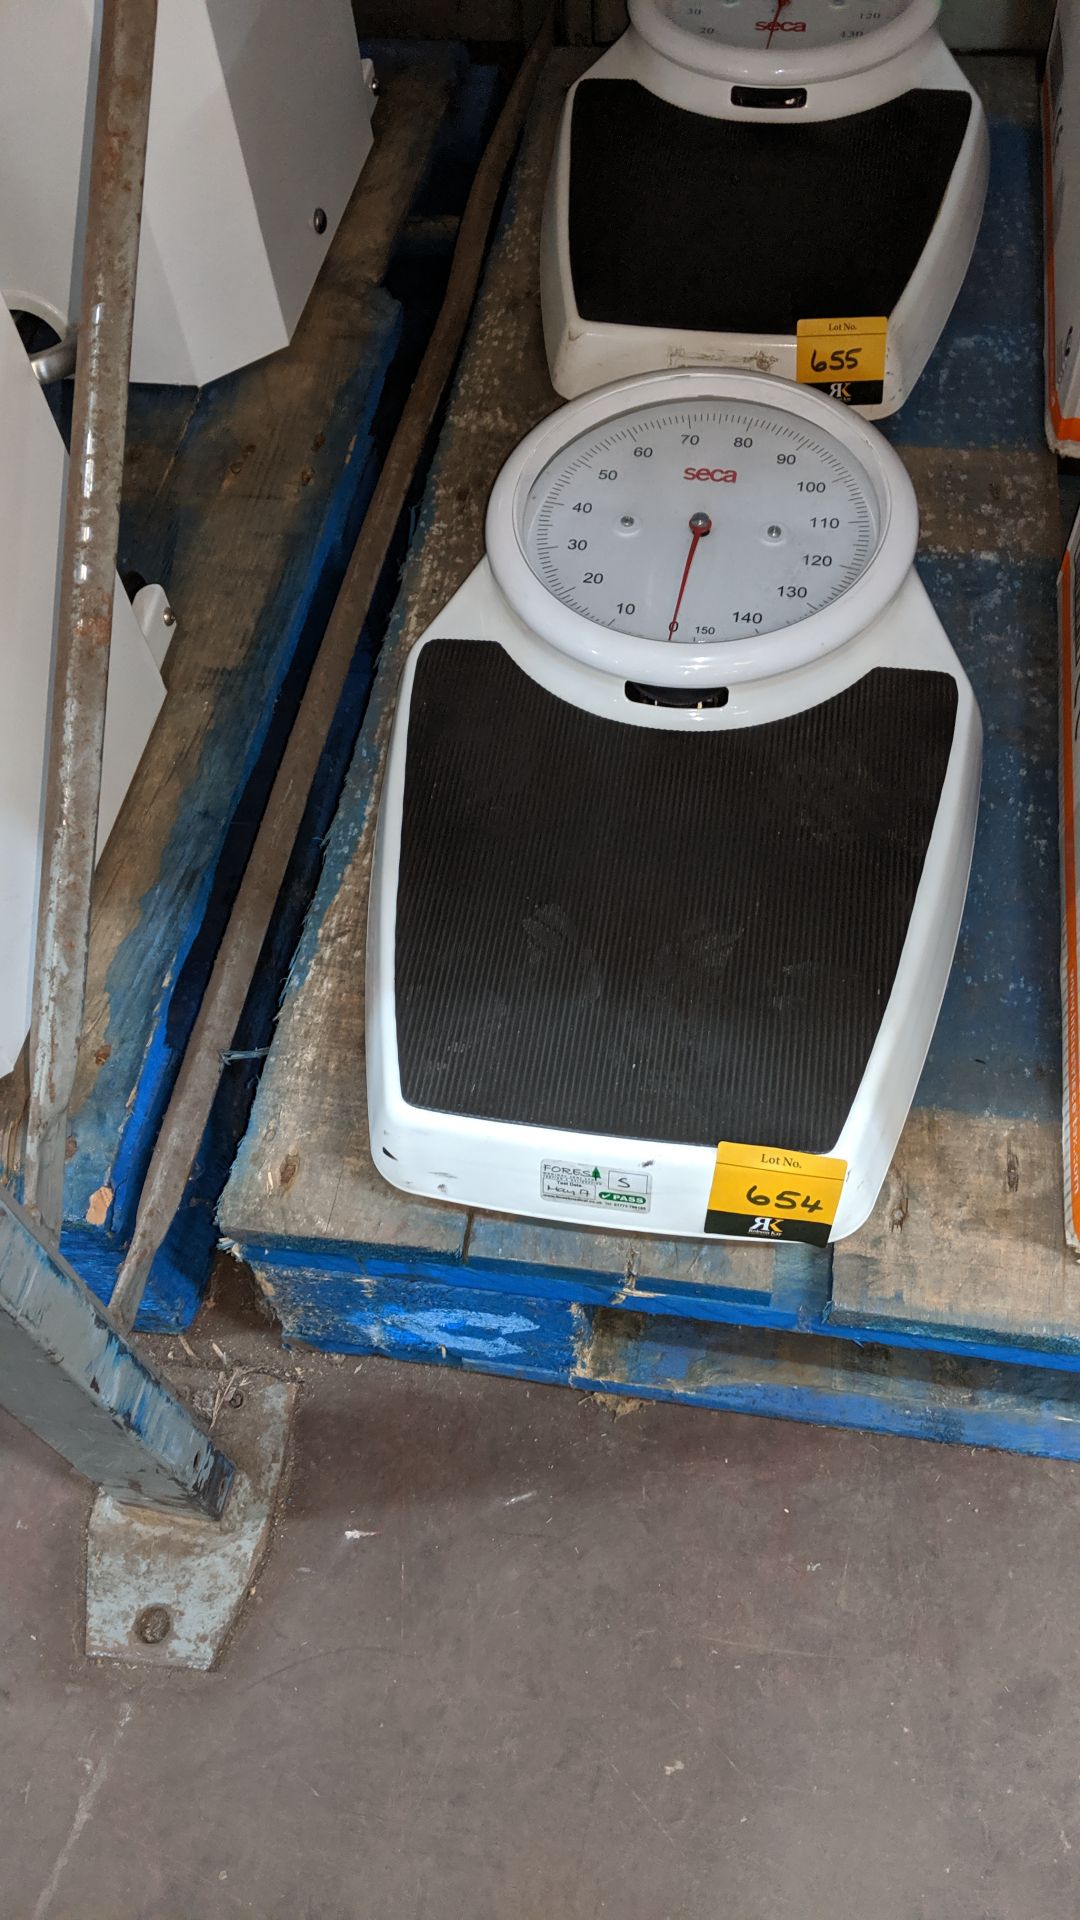 Seca stand-on scales. This is one of a large number of lots used/owned by One To One (North West)